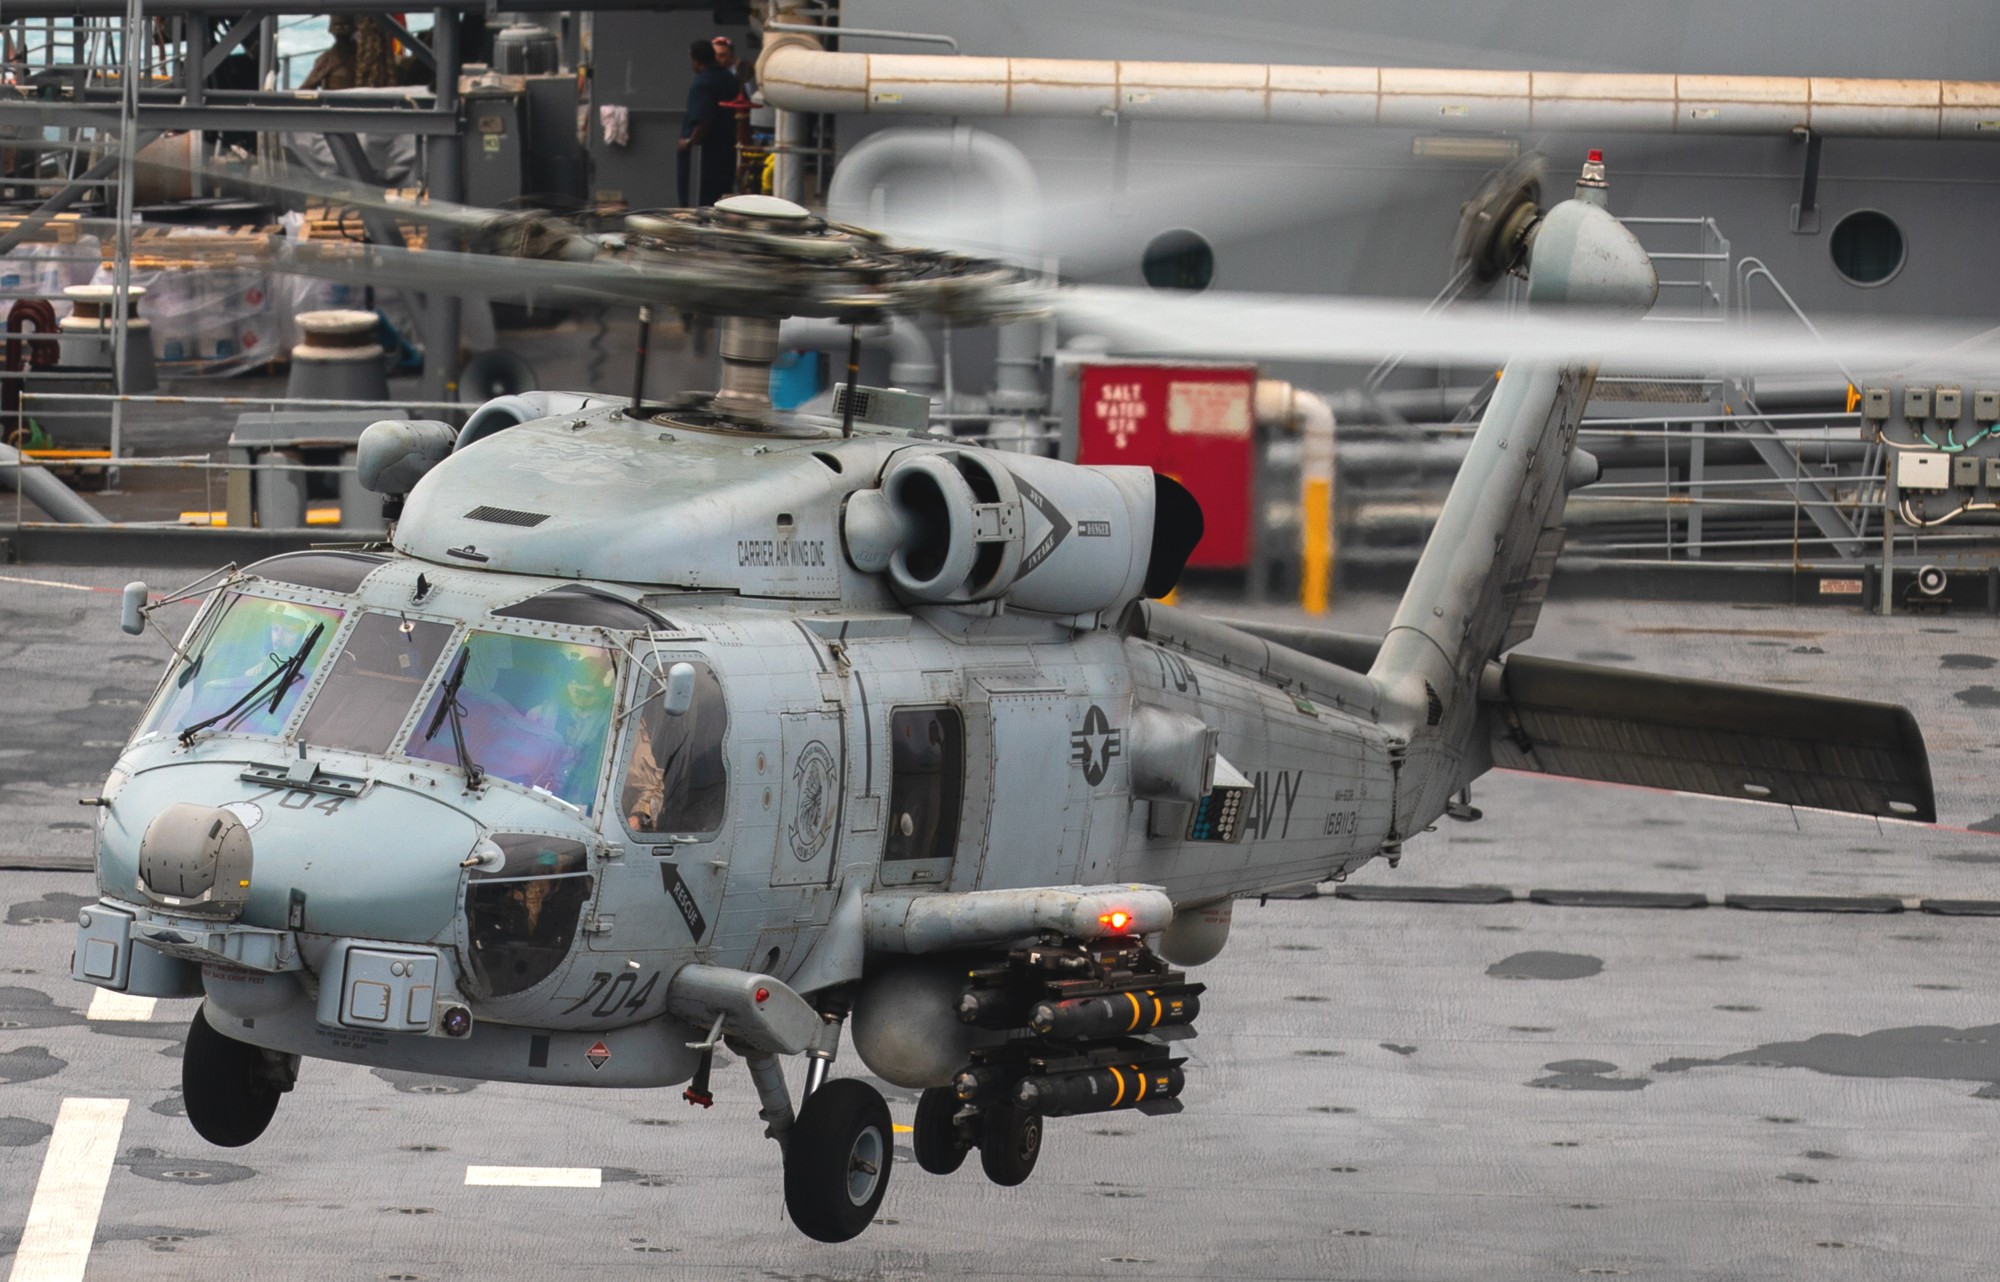 hsm-72 proud warriors helicopter maritime strike squadron mh-60r seahawk uss lewis b. puller esb-3